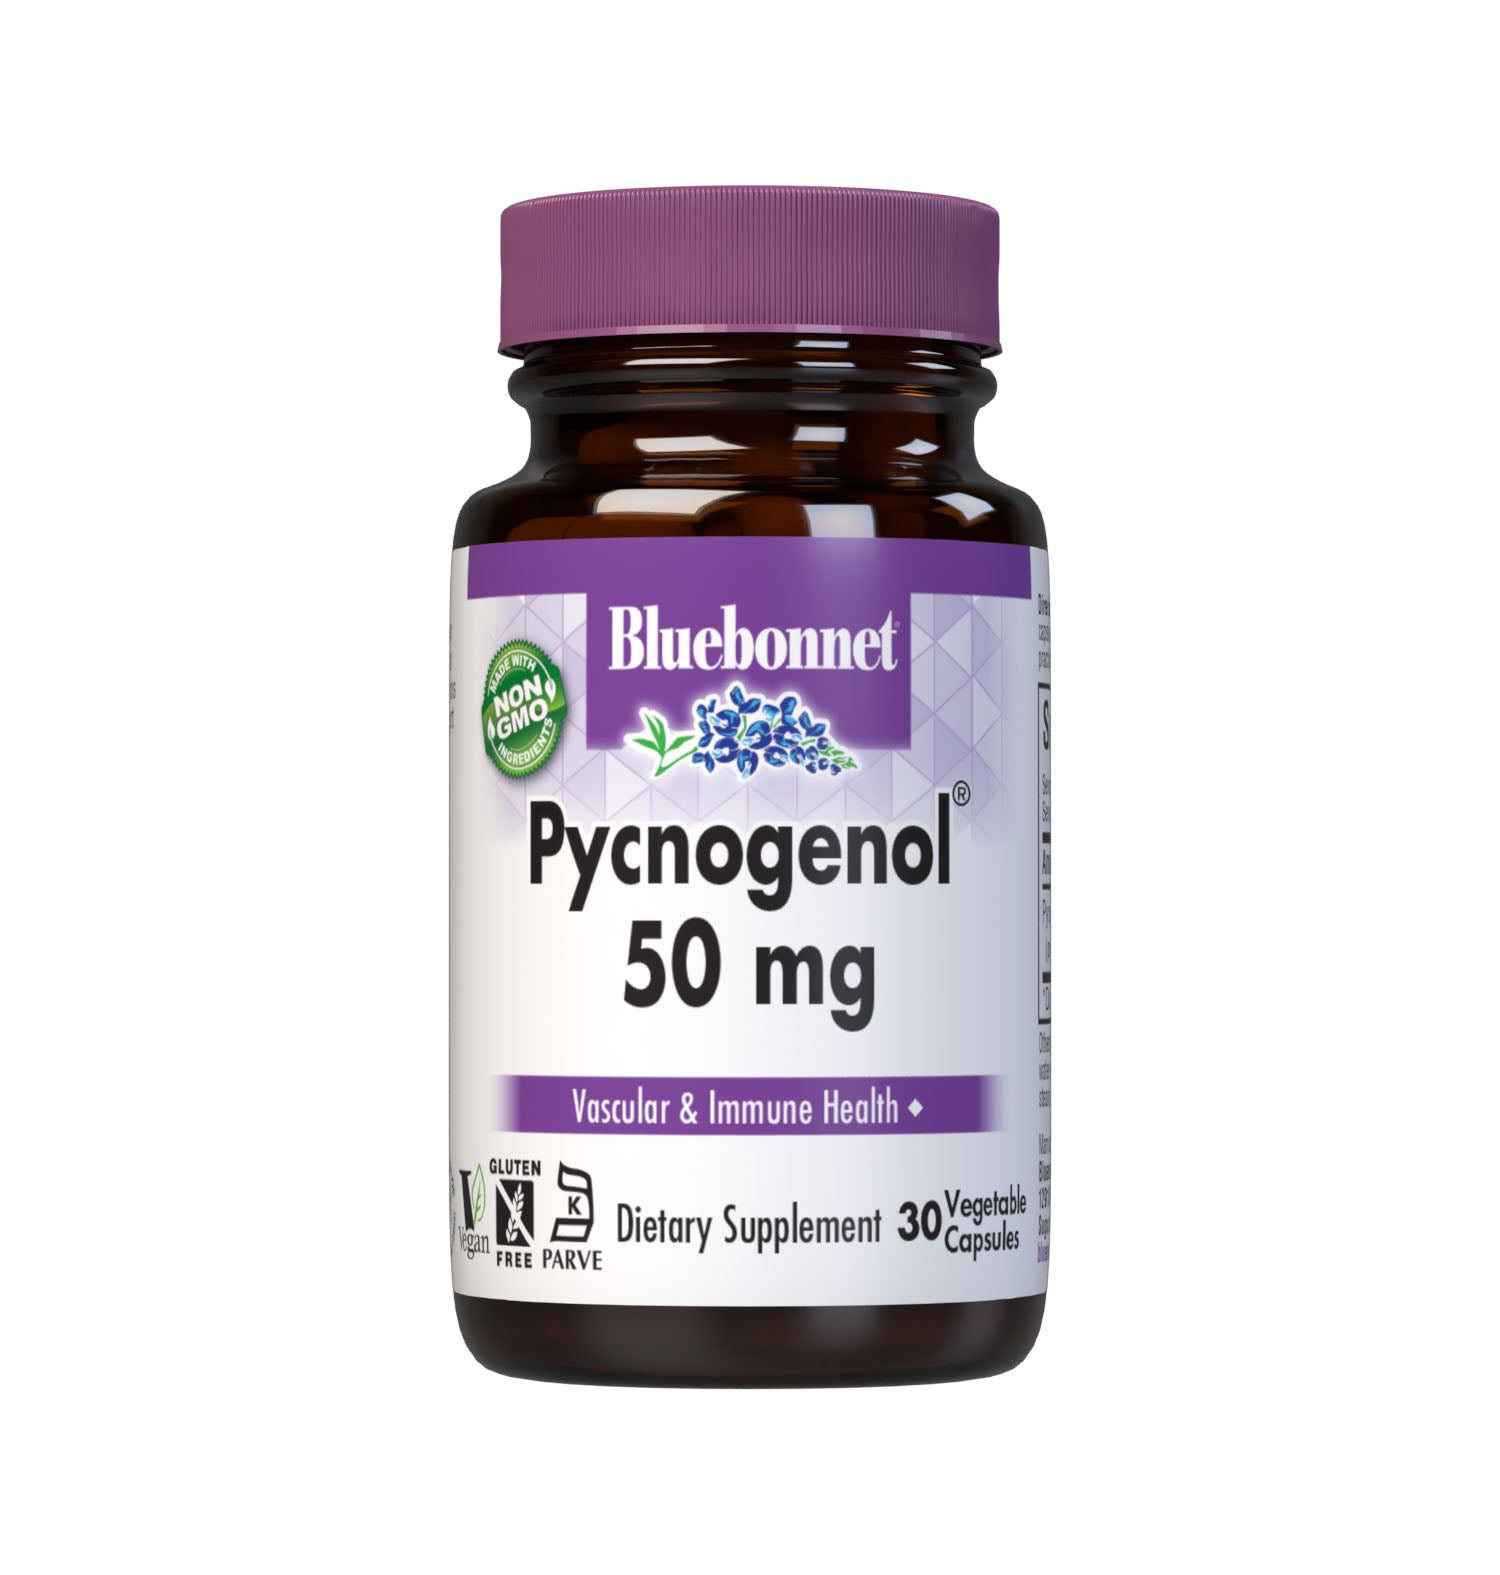 Bluebonnet’s Pycnogenol 50 mg 30 Vegetable Capsules are derived from the bark of the European coastal pine, Pinus maritima. Pycnogenol is a plant extract concentrated in oligomeric proanthocyanidins (OPCs), a water-soluble bioflavonoid. Pycnogenol may help support vascular function and immune response. #size_30 count